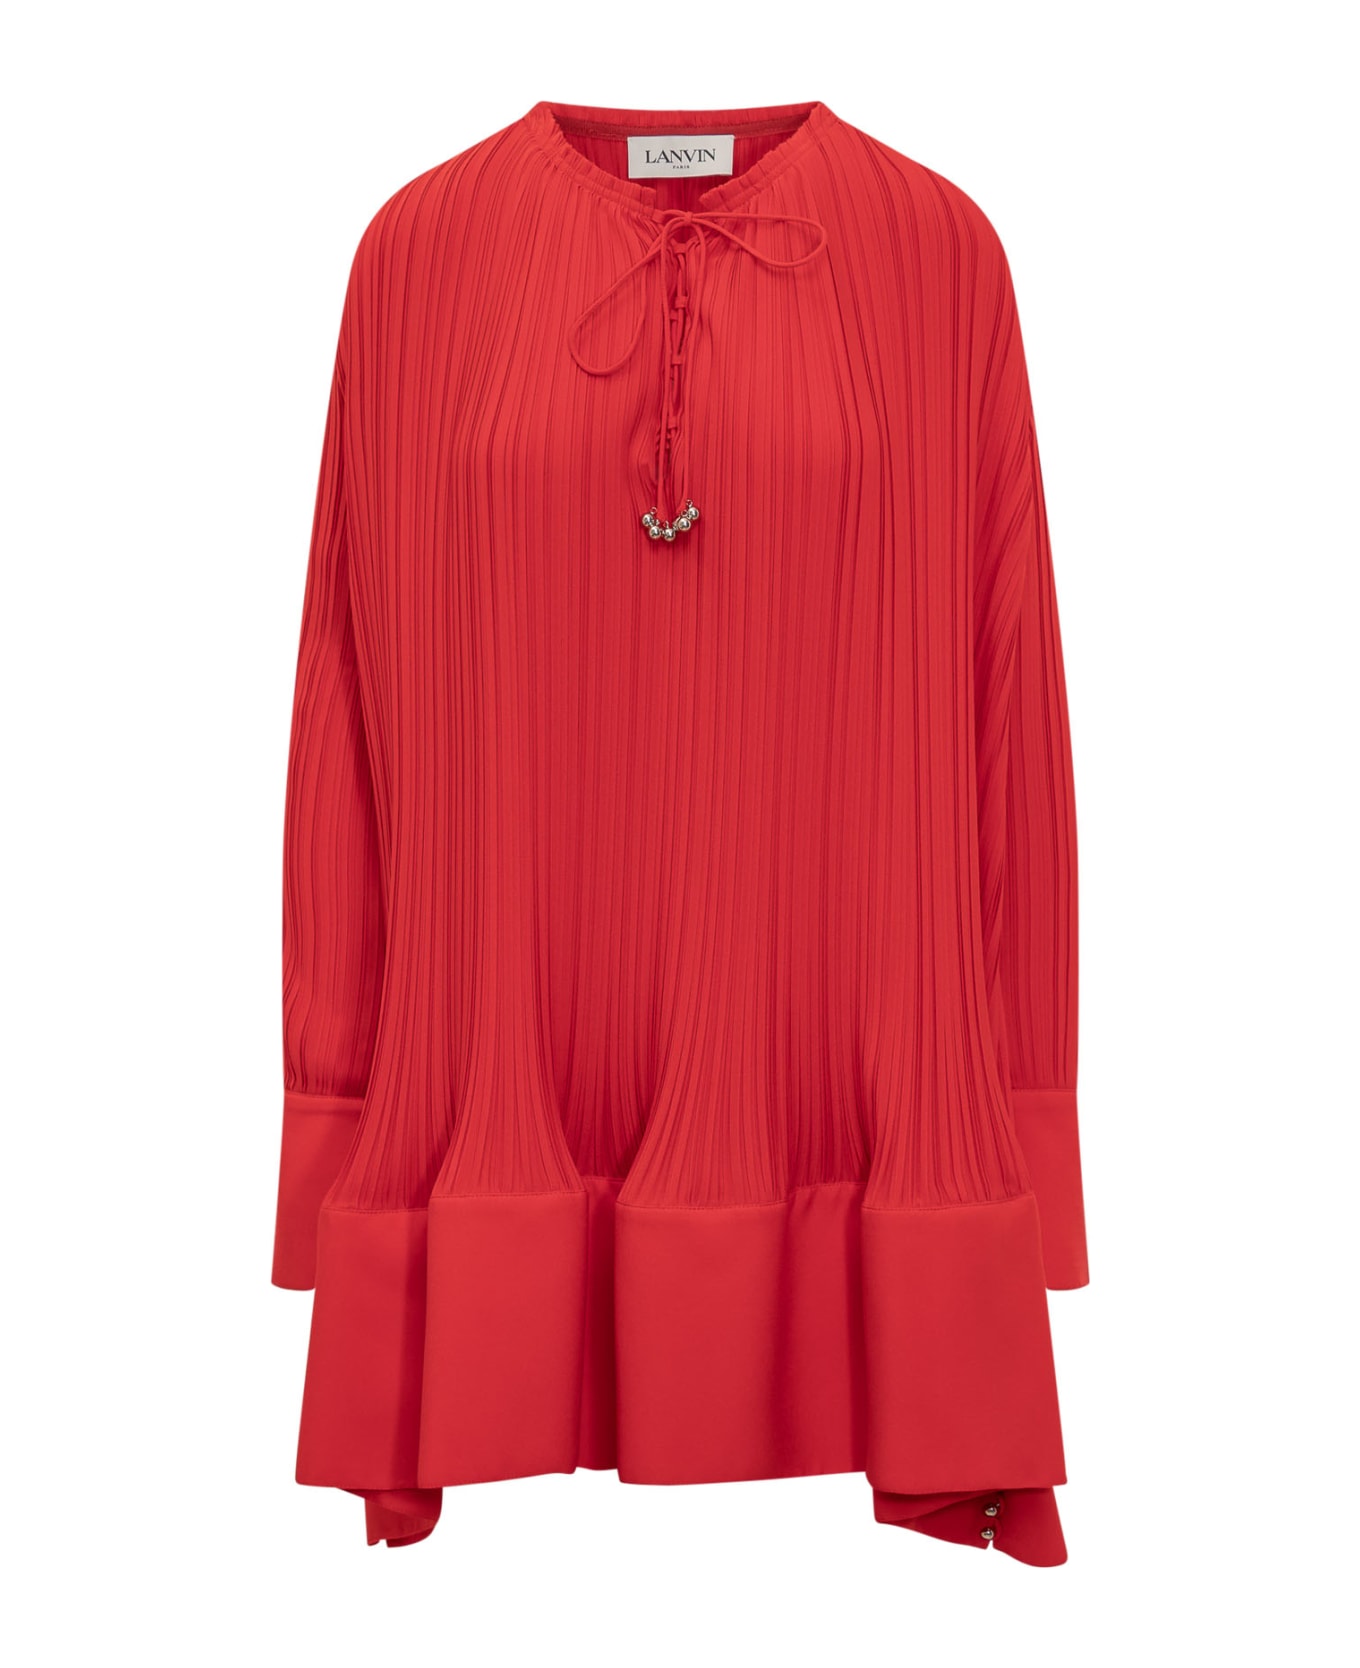 Lanvin 'flared Pleated' Dress - FLAME